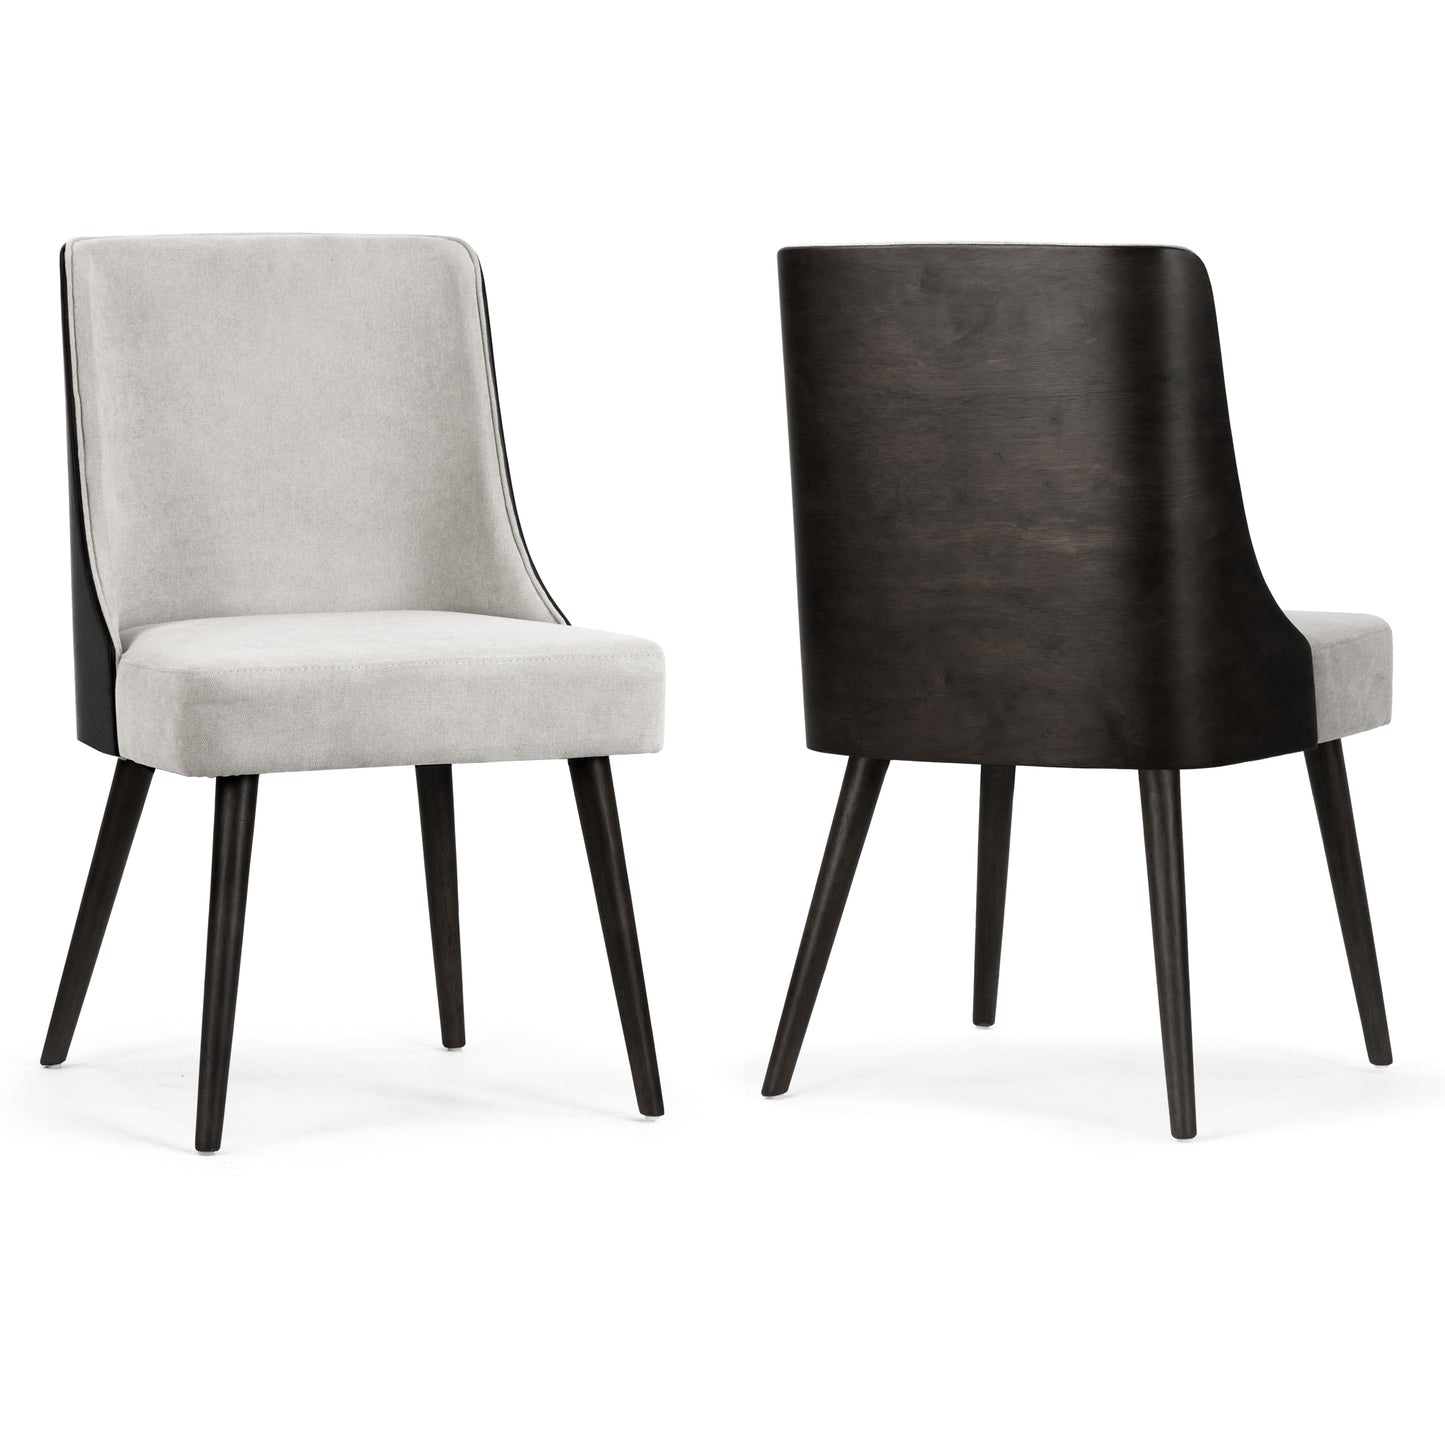 Set of 2 Asma Fabric Chair with Black Bentwood Back and Solid Wood Legs